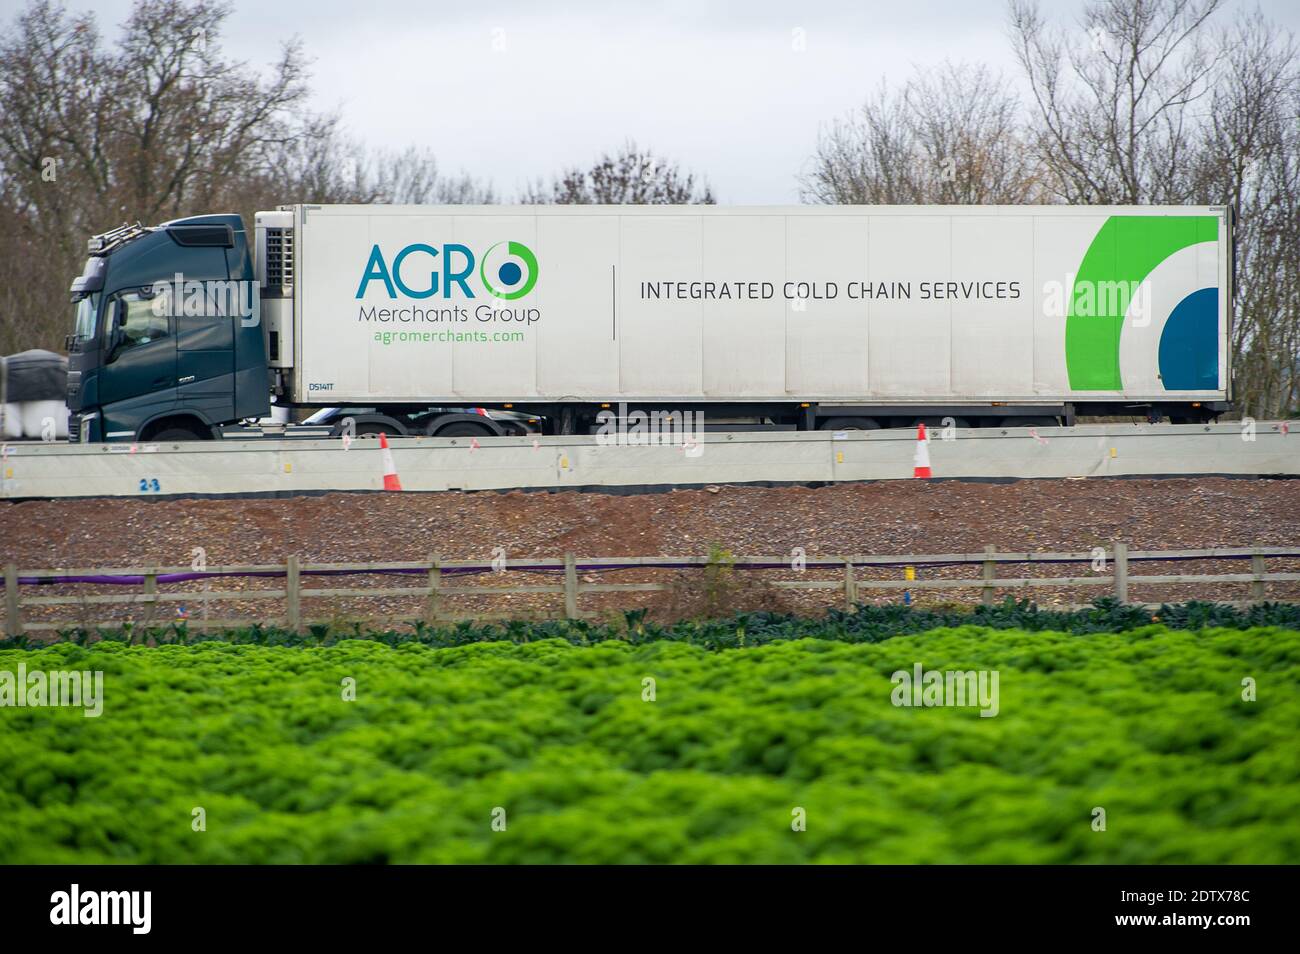 Dorney, UK. 22nd December, 2020. An AGR cold chain services truck. Following the new Covid-19 variant in the South East of England, France have closed their channel ports to UK freight. Despite, this it was business as usual today as there were plenty of freight shipments still being transported on the M4. The action by Emmanuel Macron the President of France may lead to some temporary shortages of imported citrus fruit and vegetables from the EU, however, the French action appears to only be strengthening the campaign to buy British. Credit: Maureen McLean/Alamy Stock Photo